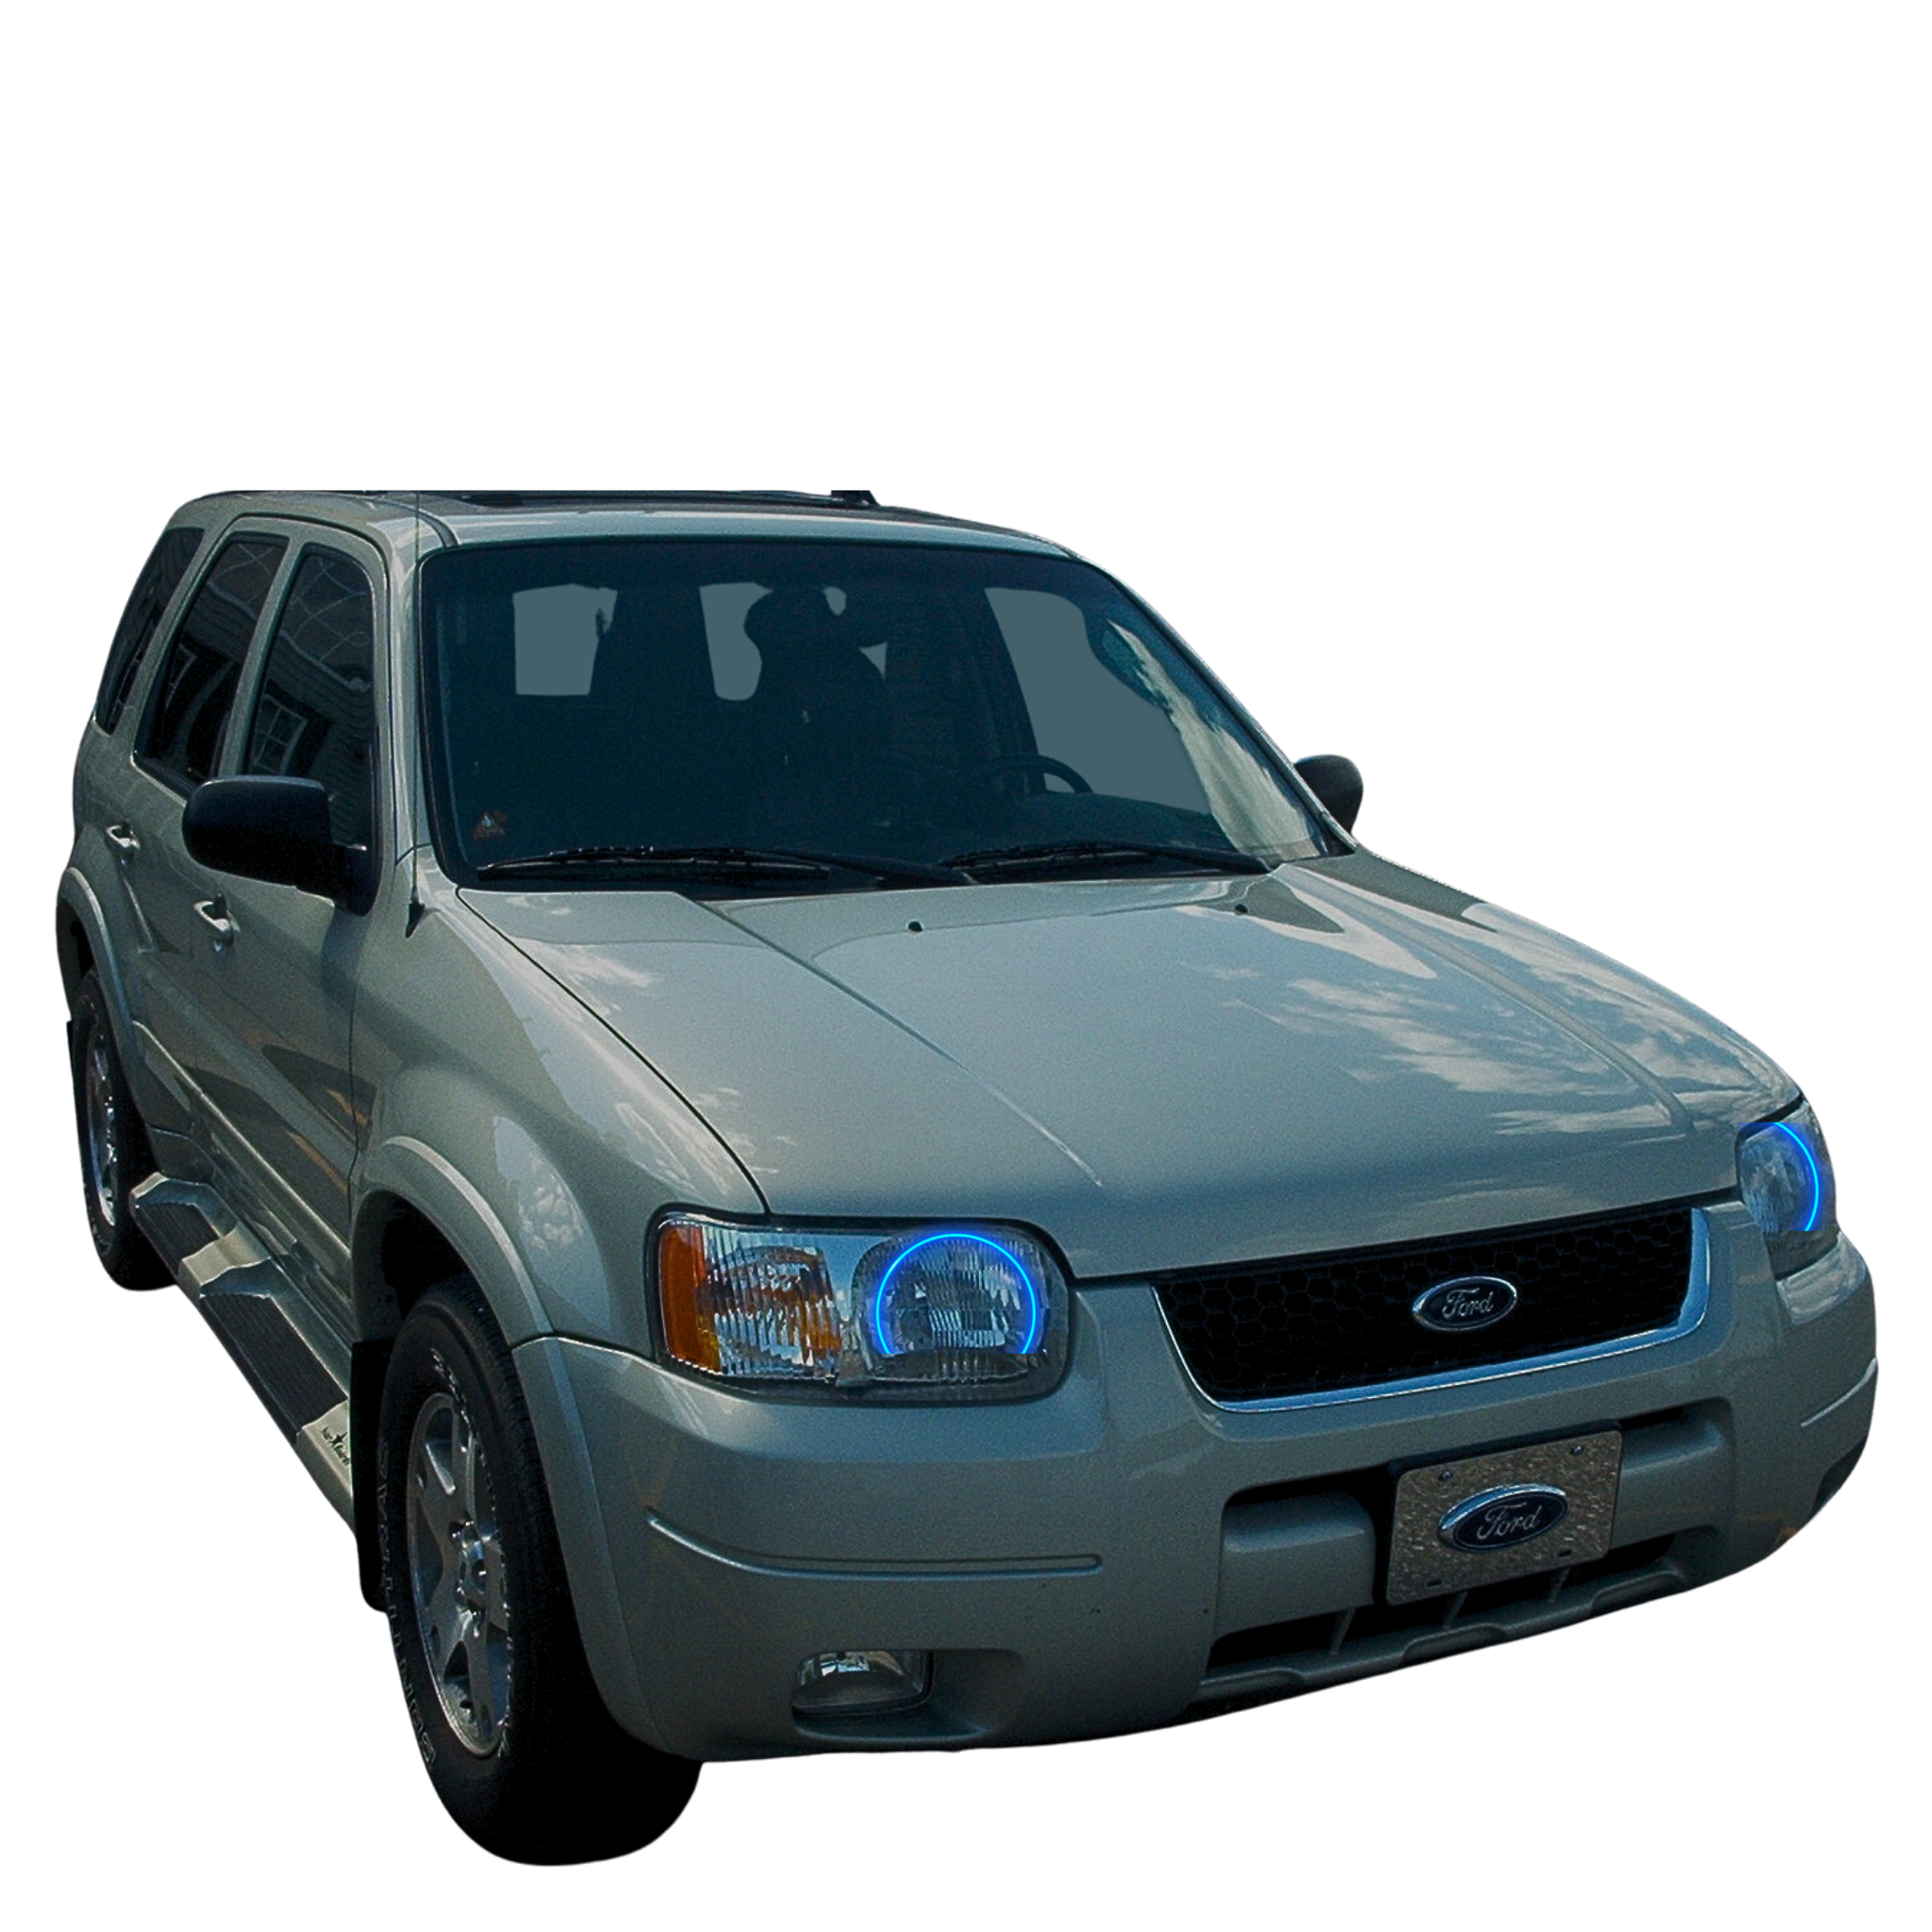 2001-2004 Ford Escape Multicolor Halo Kit - RGB Halo Kits Multicolor Flow Series Color Chasing RGBWA LED headlight kit Oracle Lighting Trendz OneUpLighting Morimoto theretrofitsource AutoLEDTech Diode Dynamics